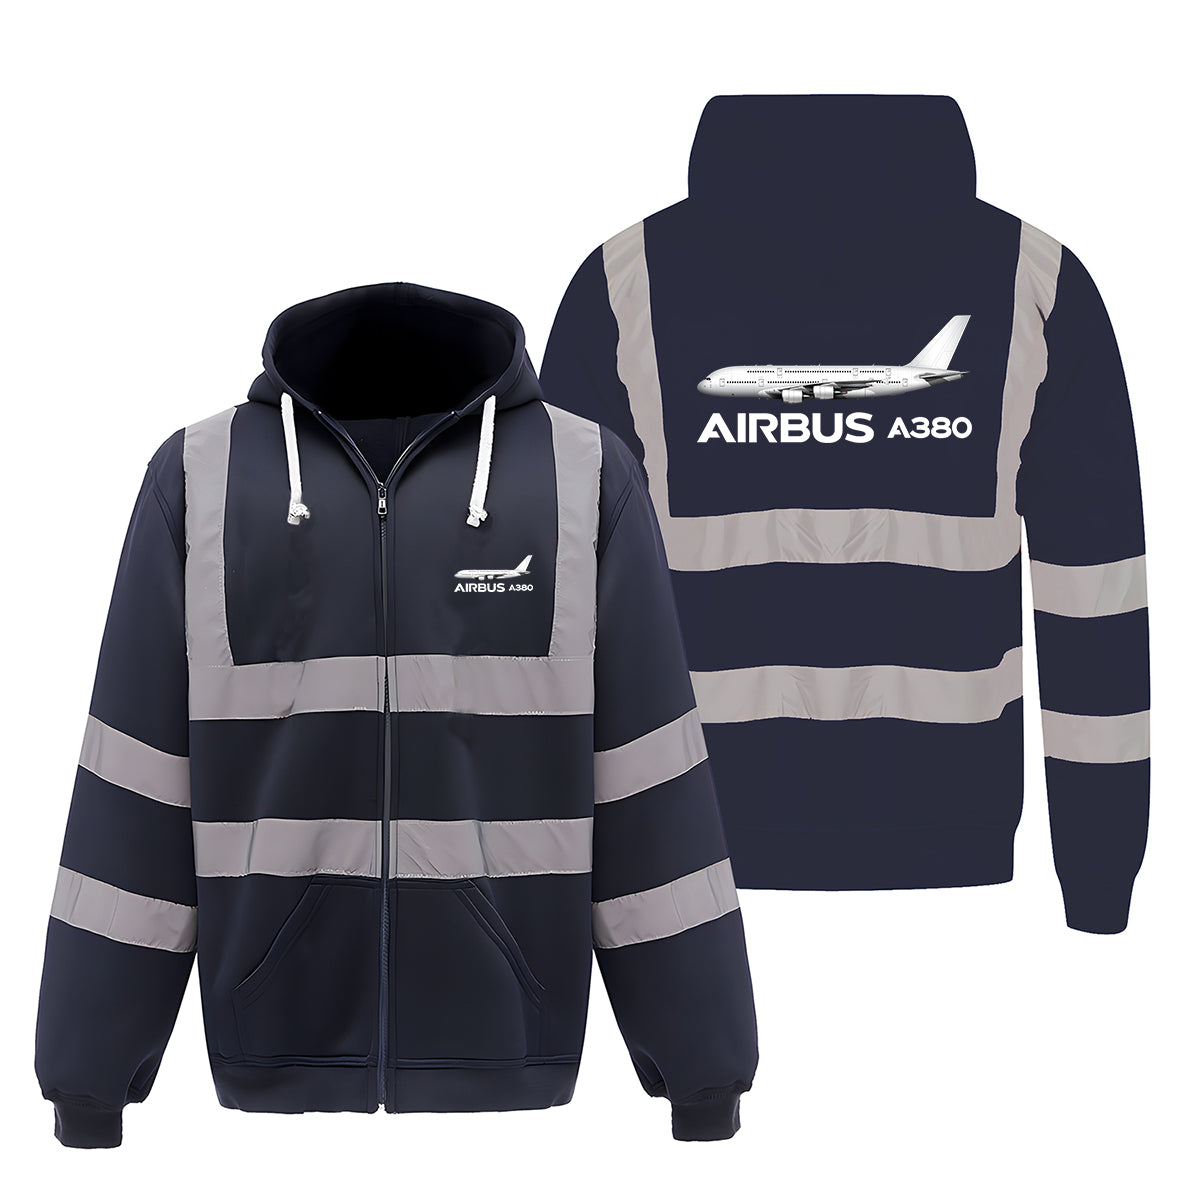 The Airbus A380 Designed Reflective Zipped Hoodies